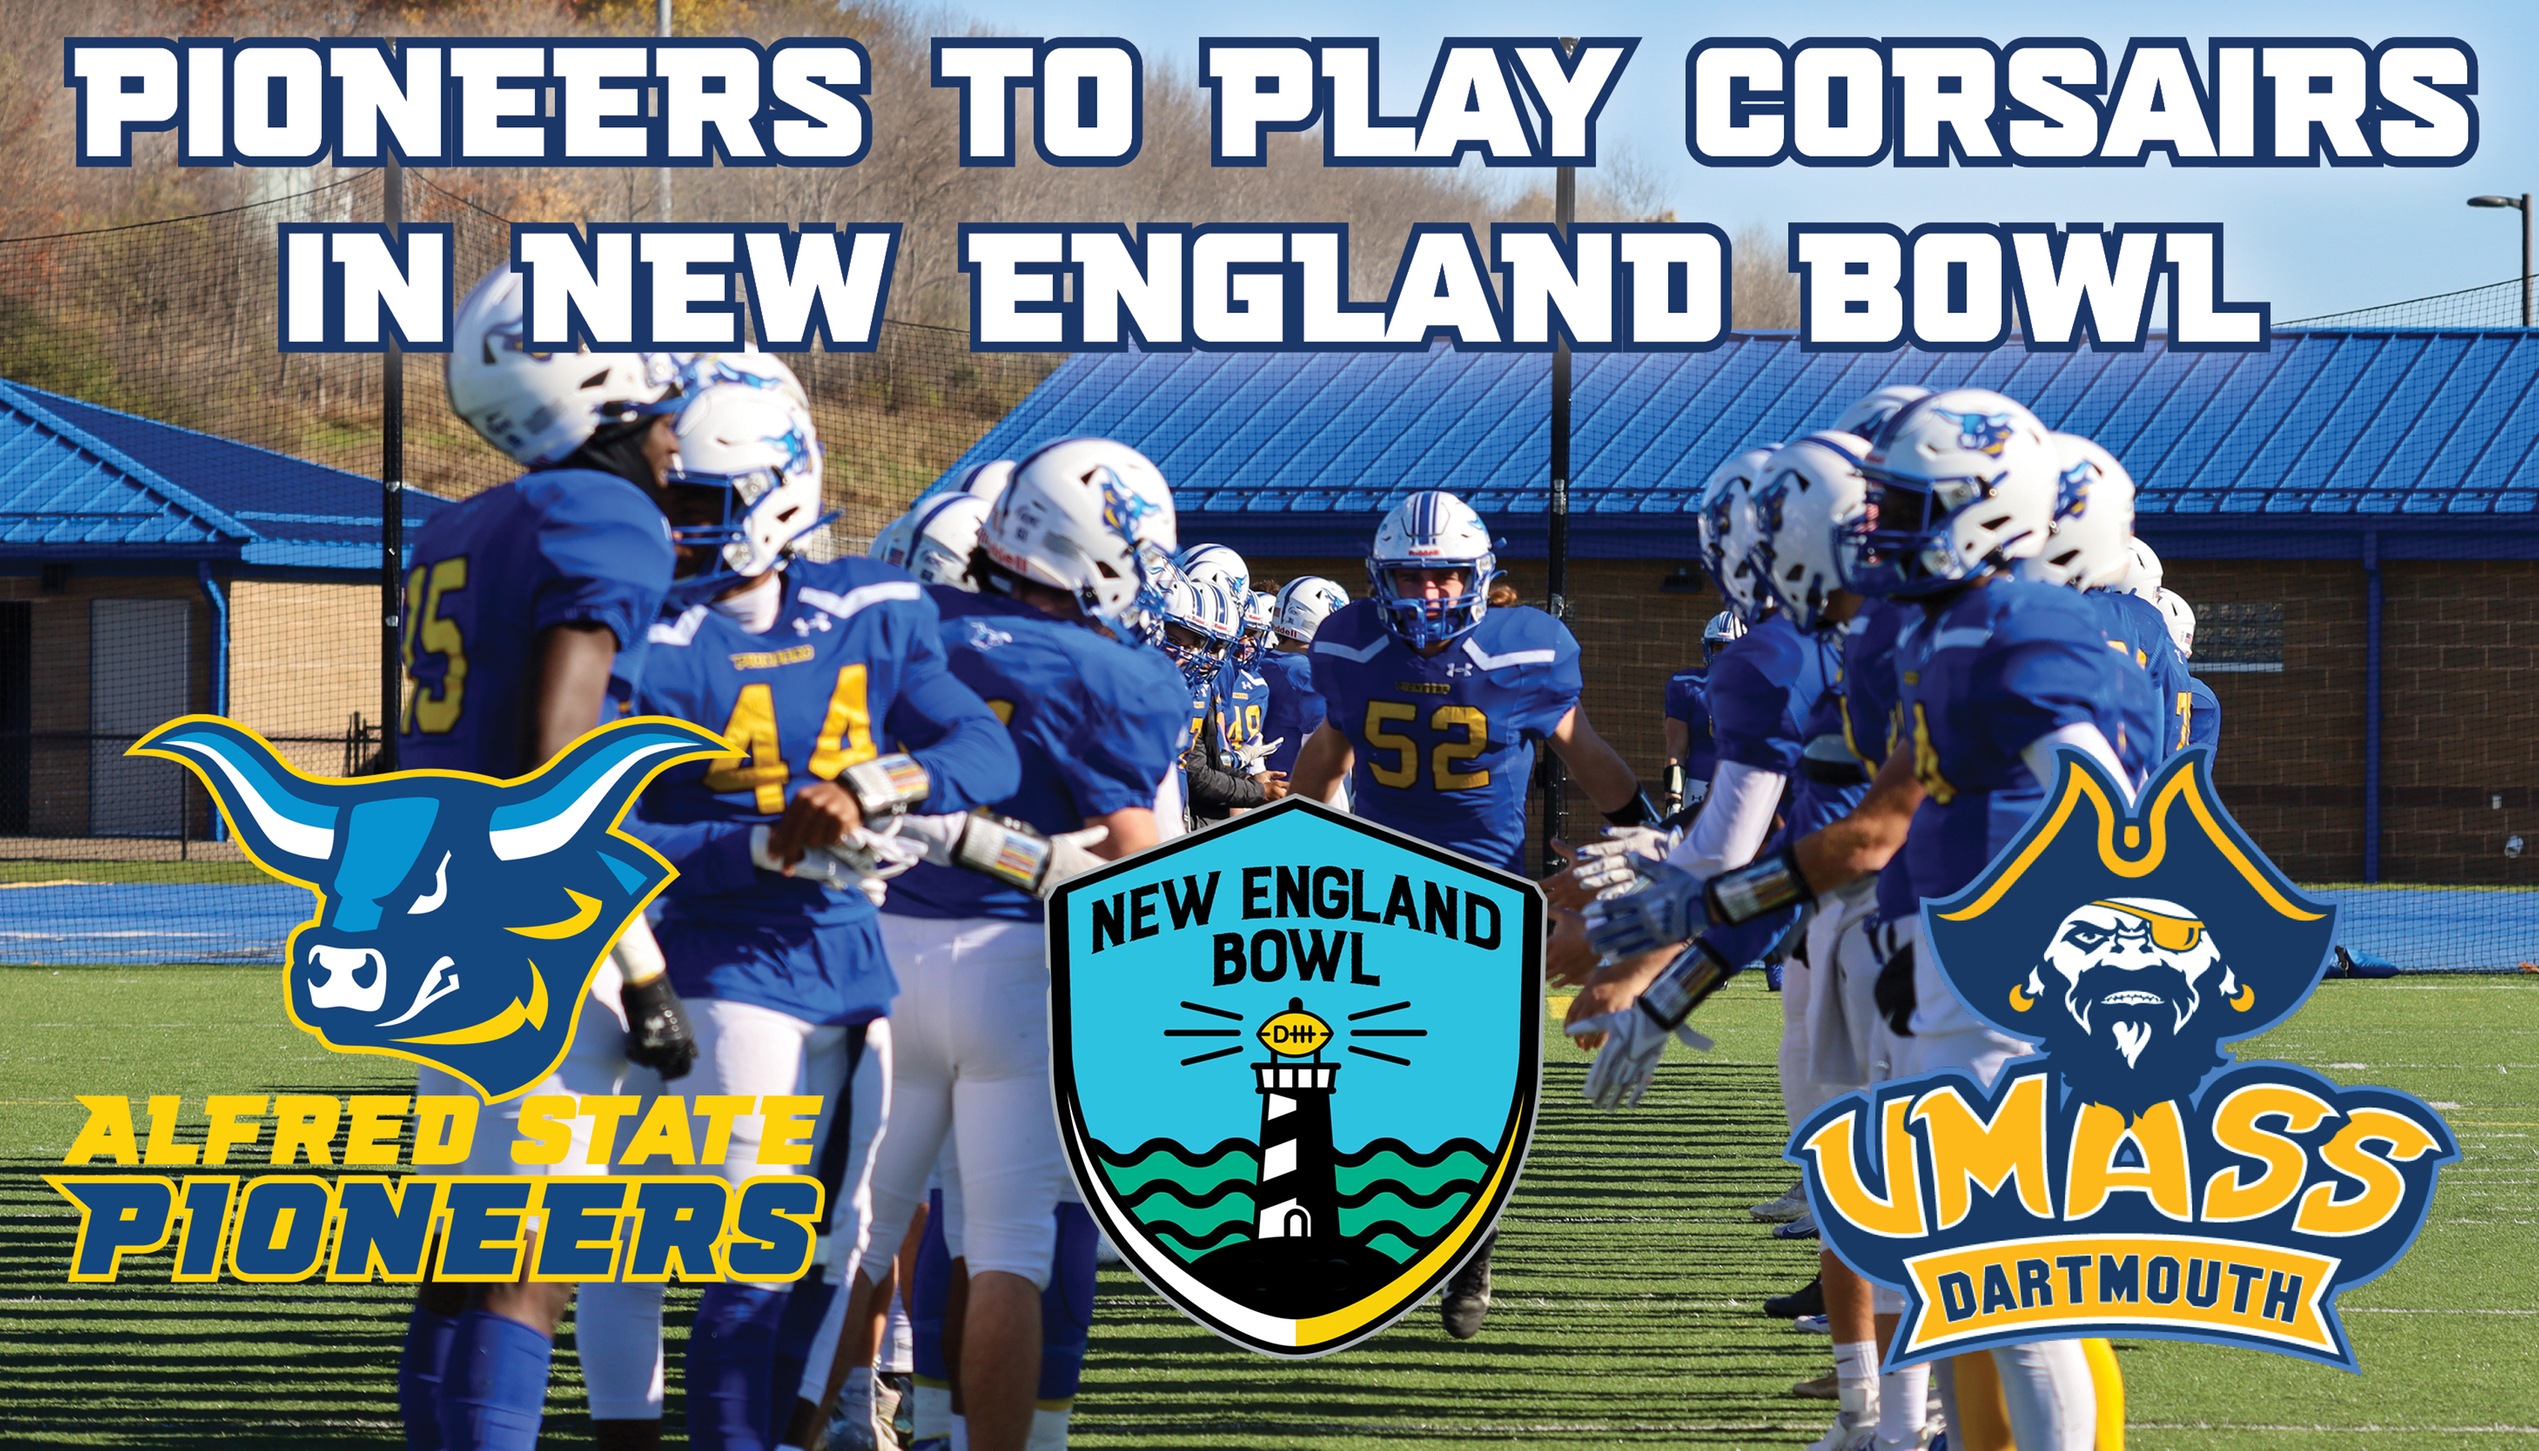 Pioneers to Battle Corsairs in New England Bowl